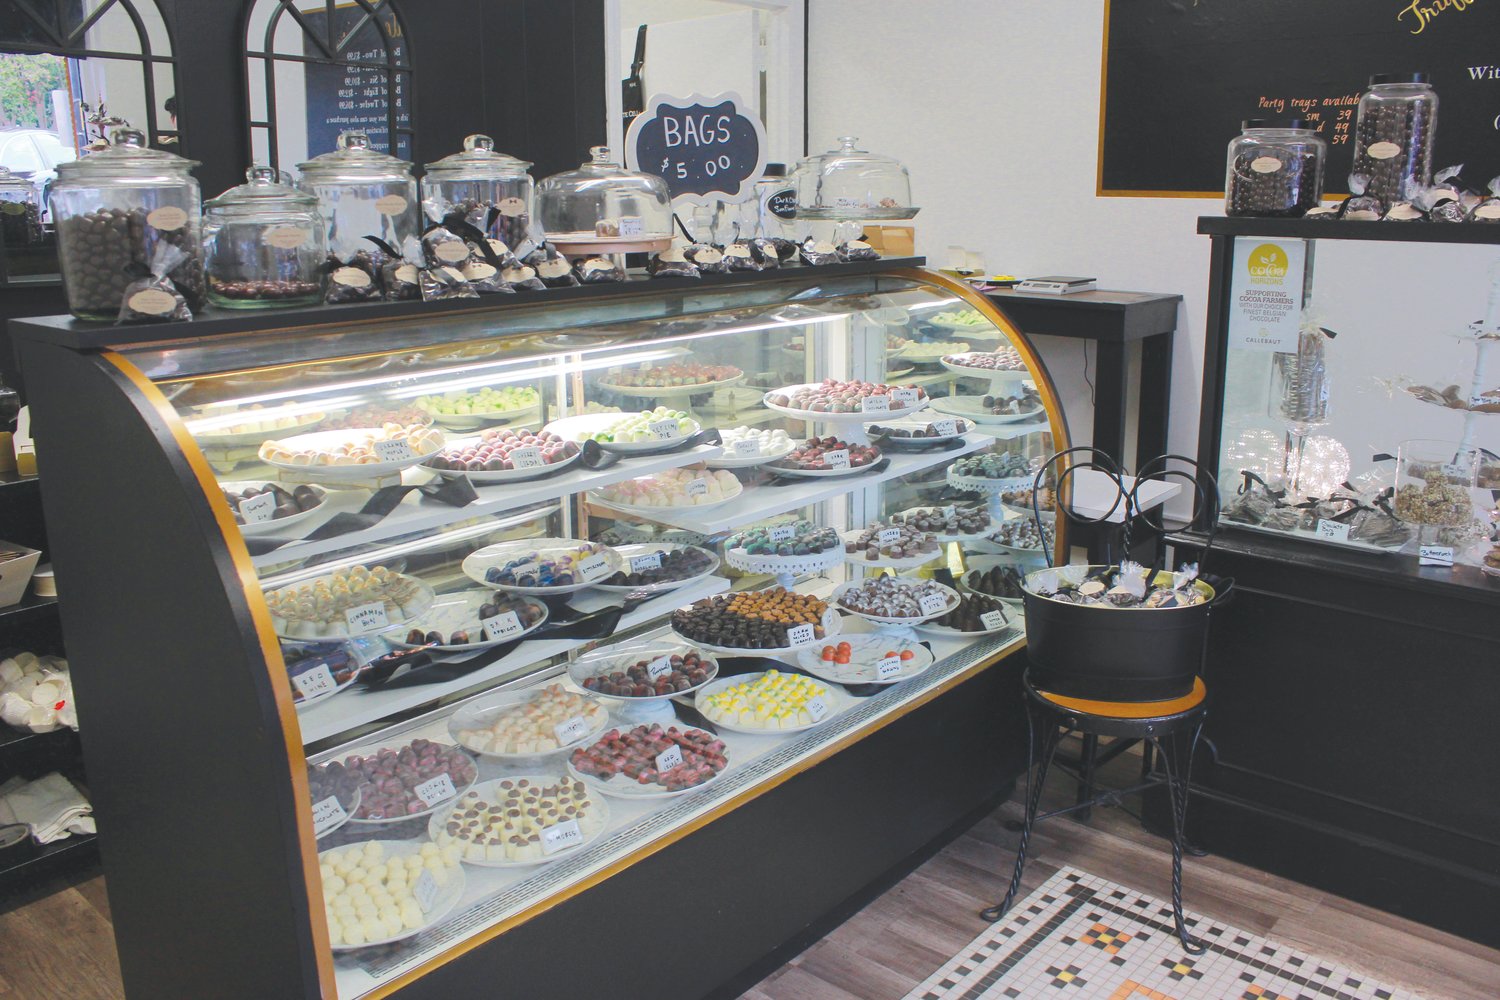 Dozens of truffles and bagged candies are on display at the front counter at the Chocolate Cellar Deux in downtown Pittsboro. The wide variety of truffle flavors include chocolate, salted caramel, Irish cream, lemon meringue, glazed pecan, pomegranate and more.